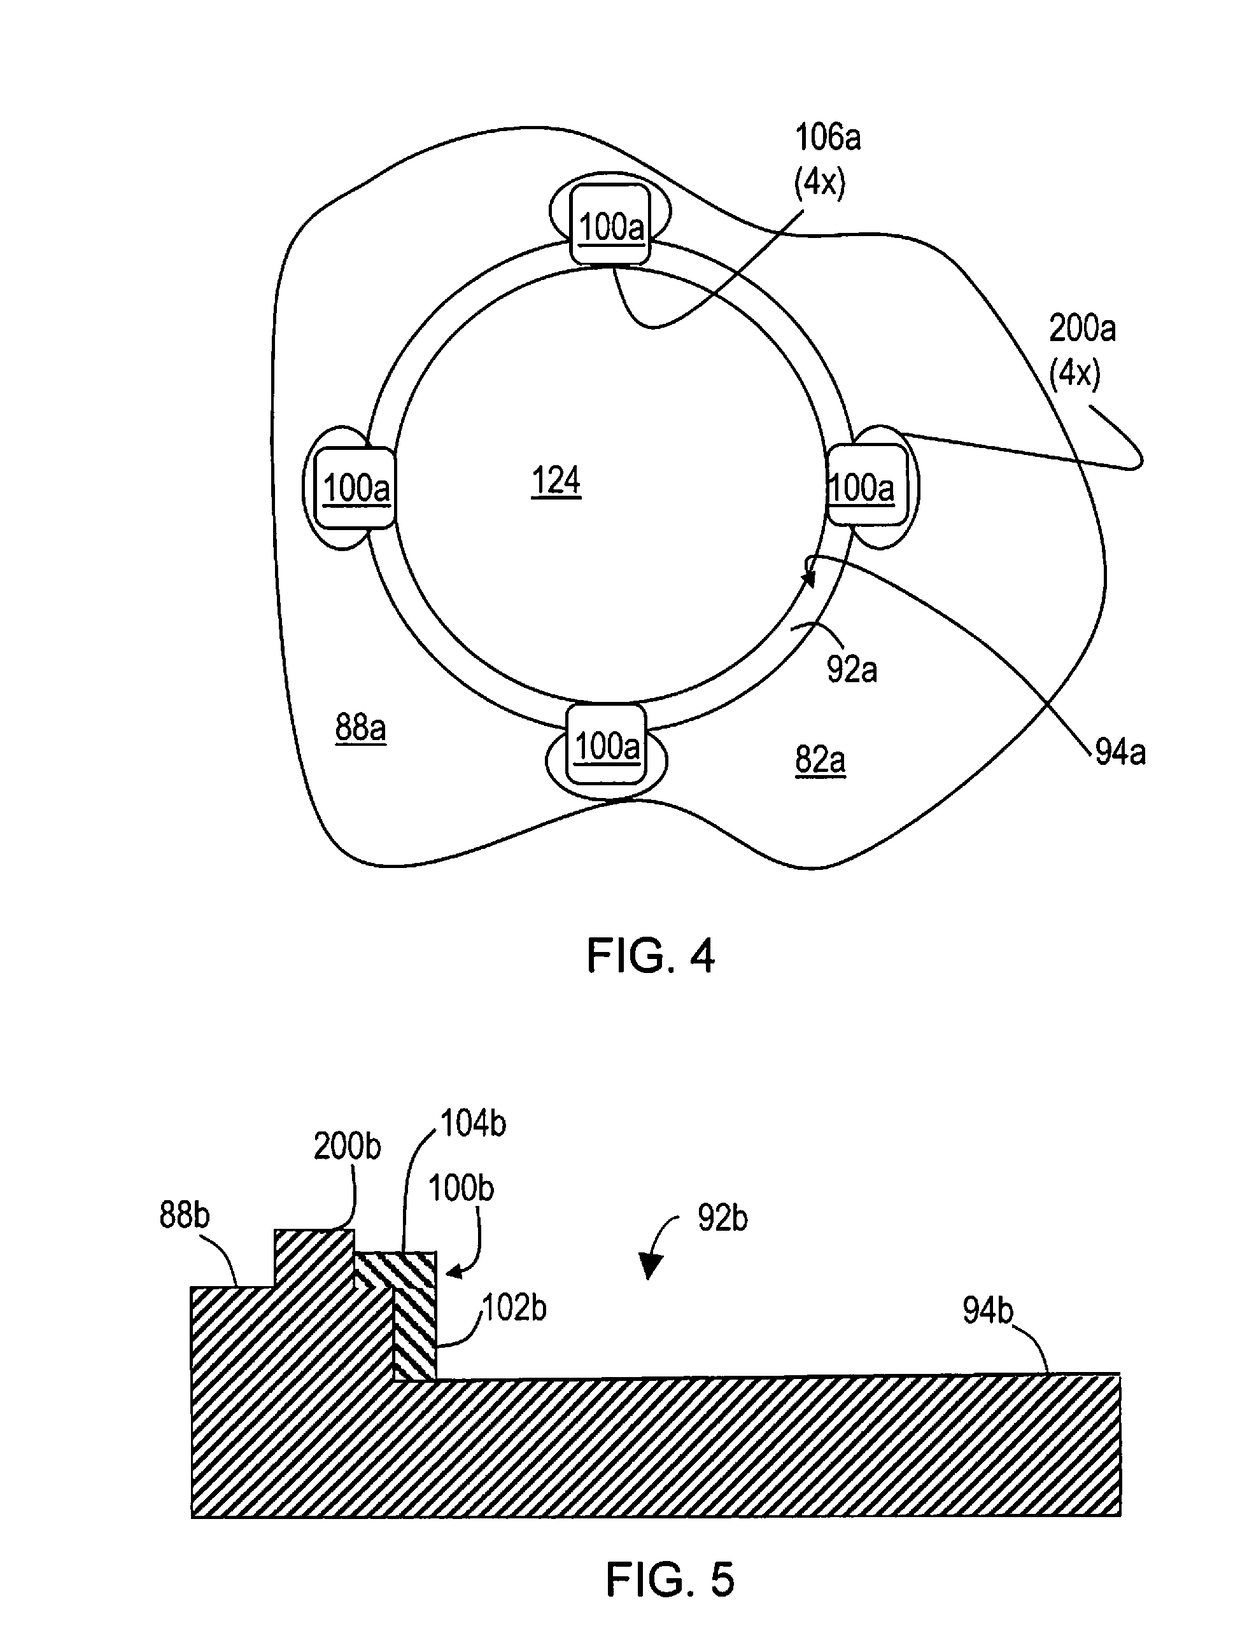 Wafer carrier having provisions for improving heating uniformity in chemical vapor deposition systems